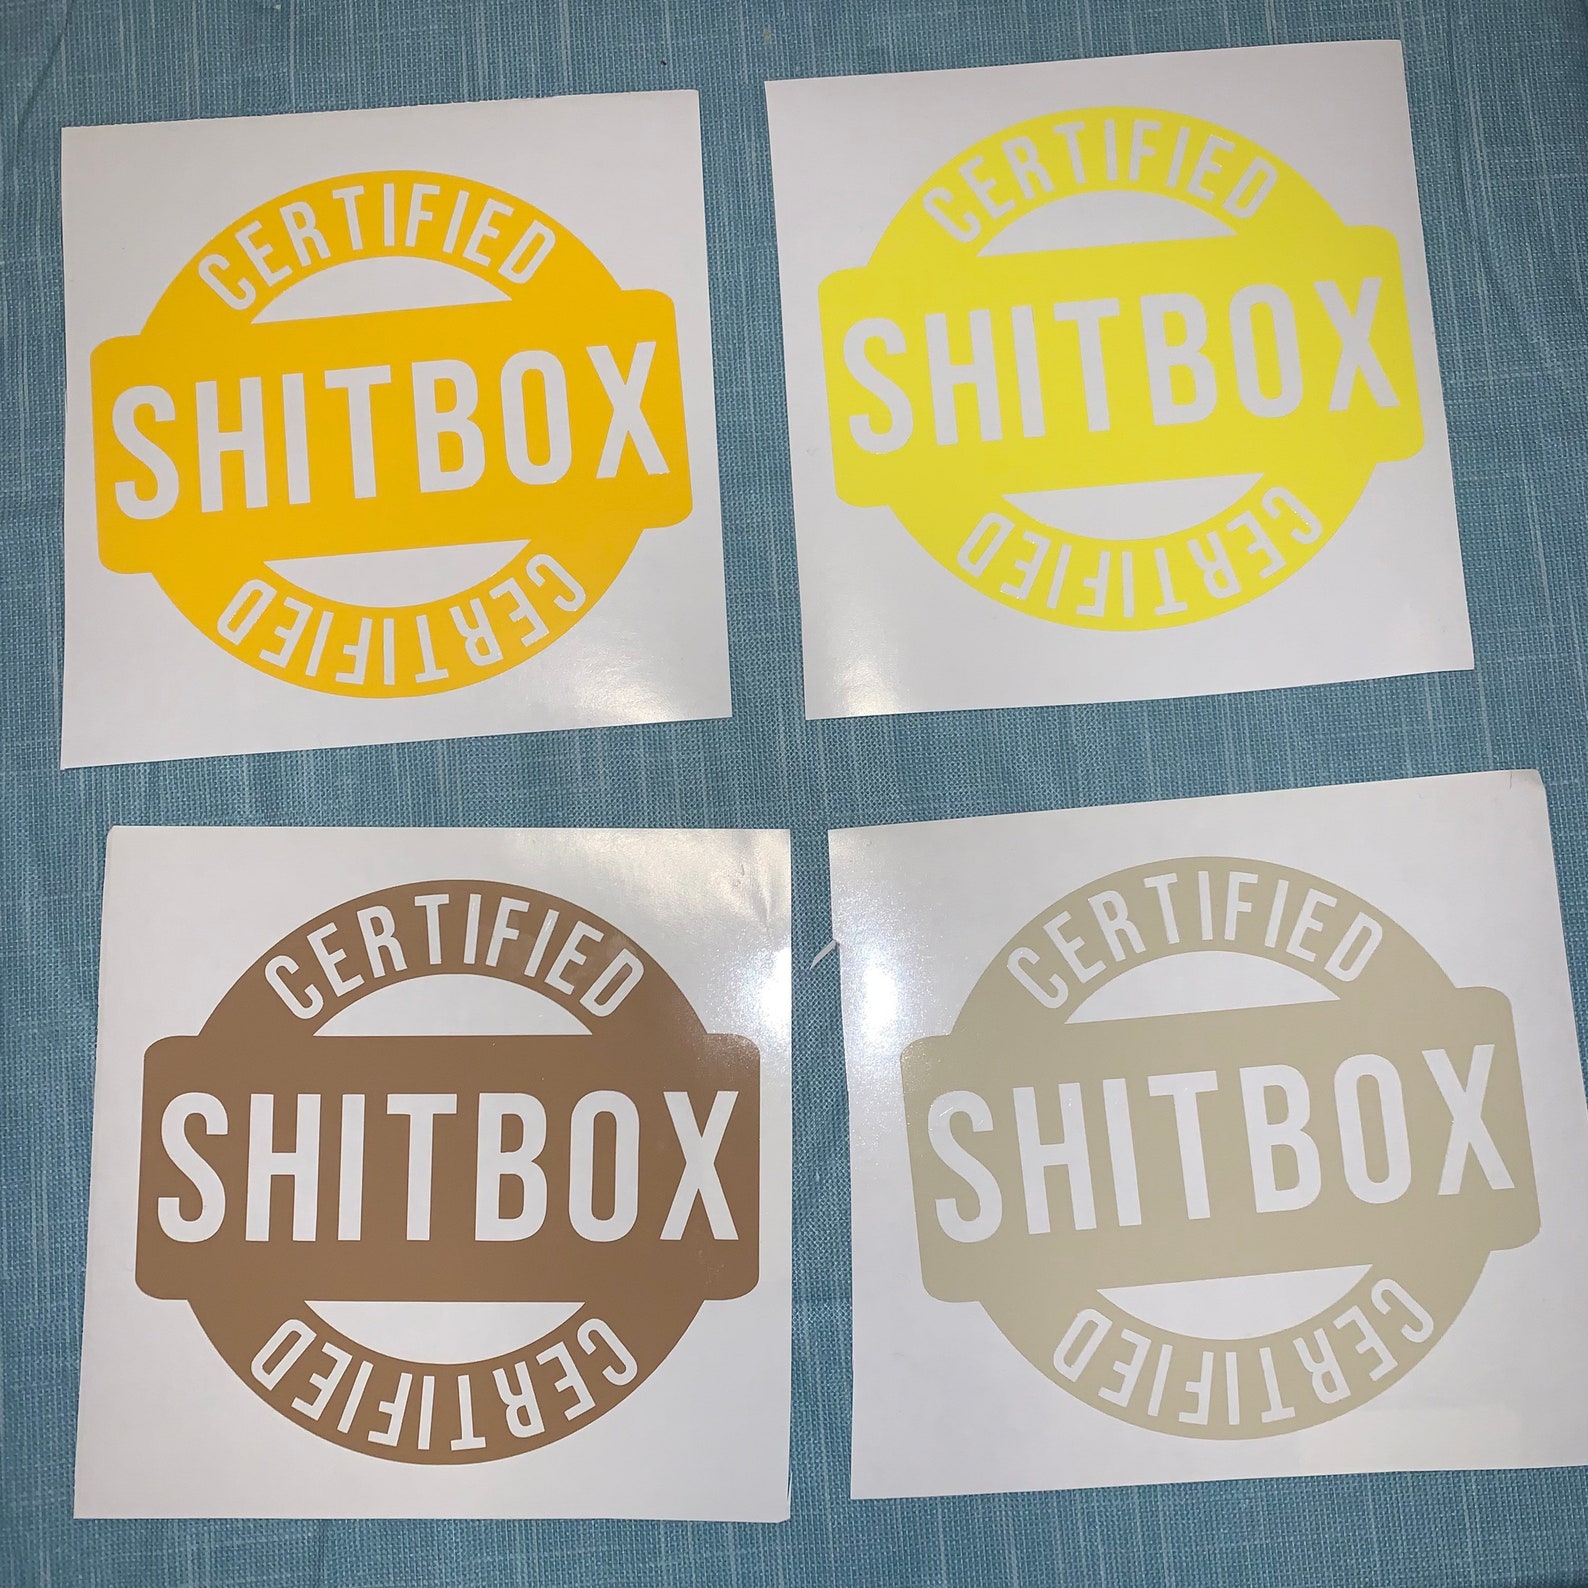 2 Certified Shitbox Vinyl Decals Stickers for car laptop | Etsy